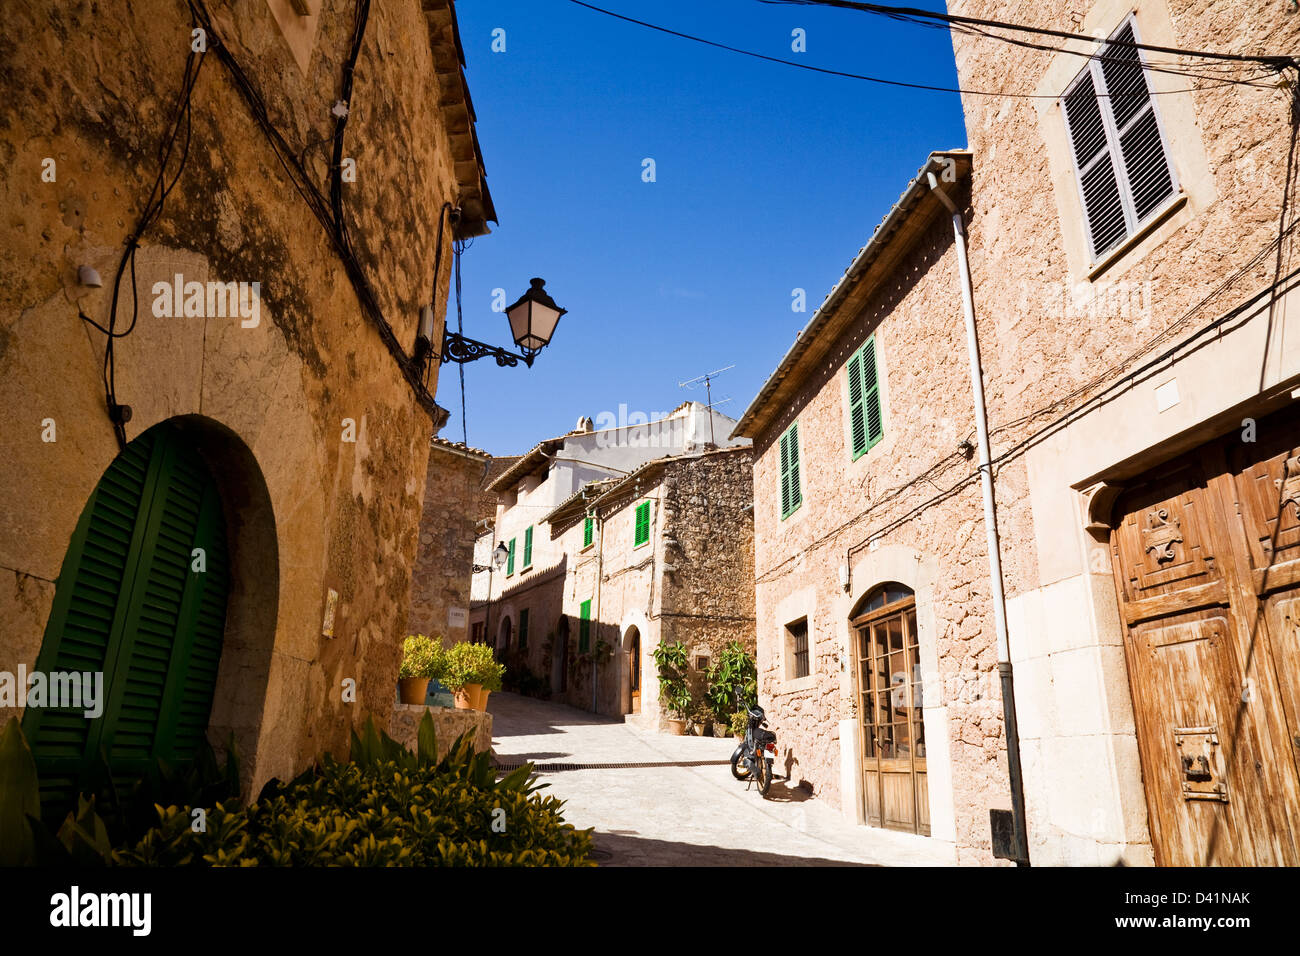 Typical, old Spanish houses and street in Valldemossa, Majorca, Spain Stock Photo